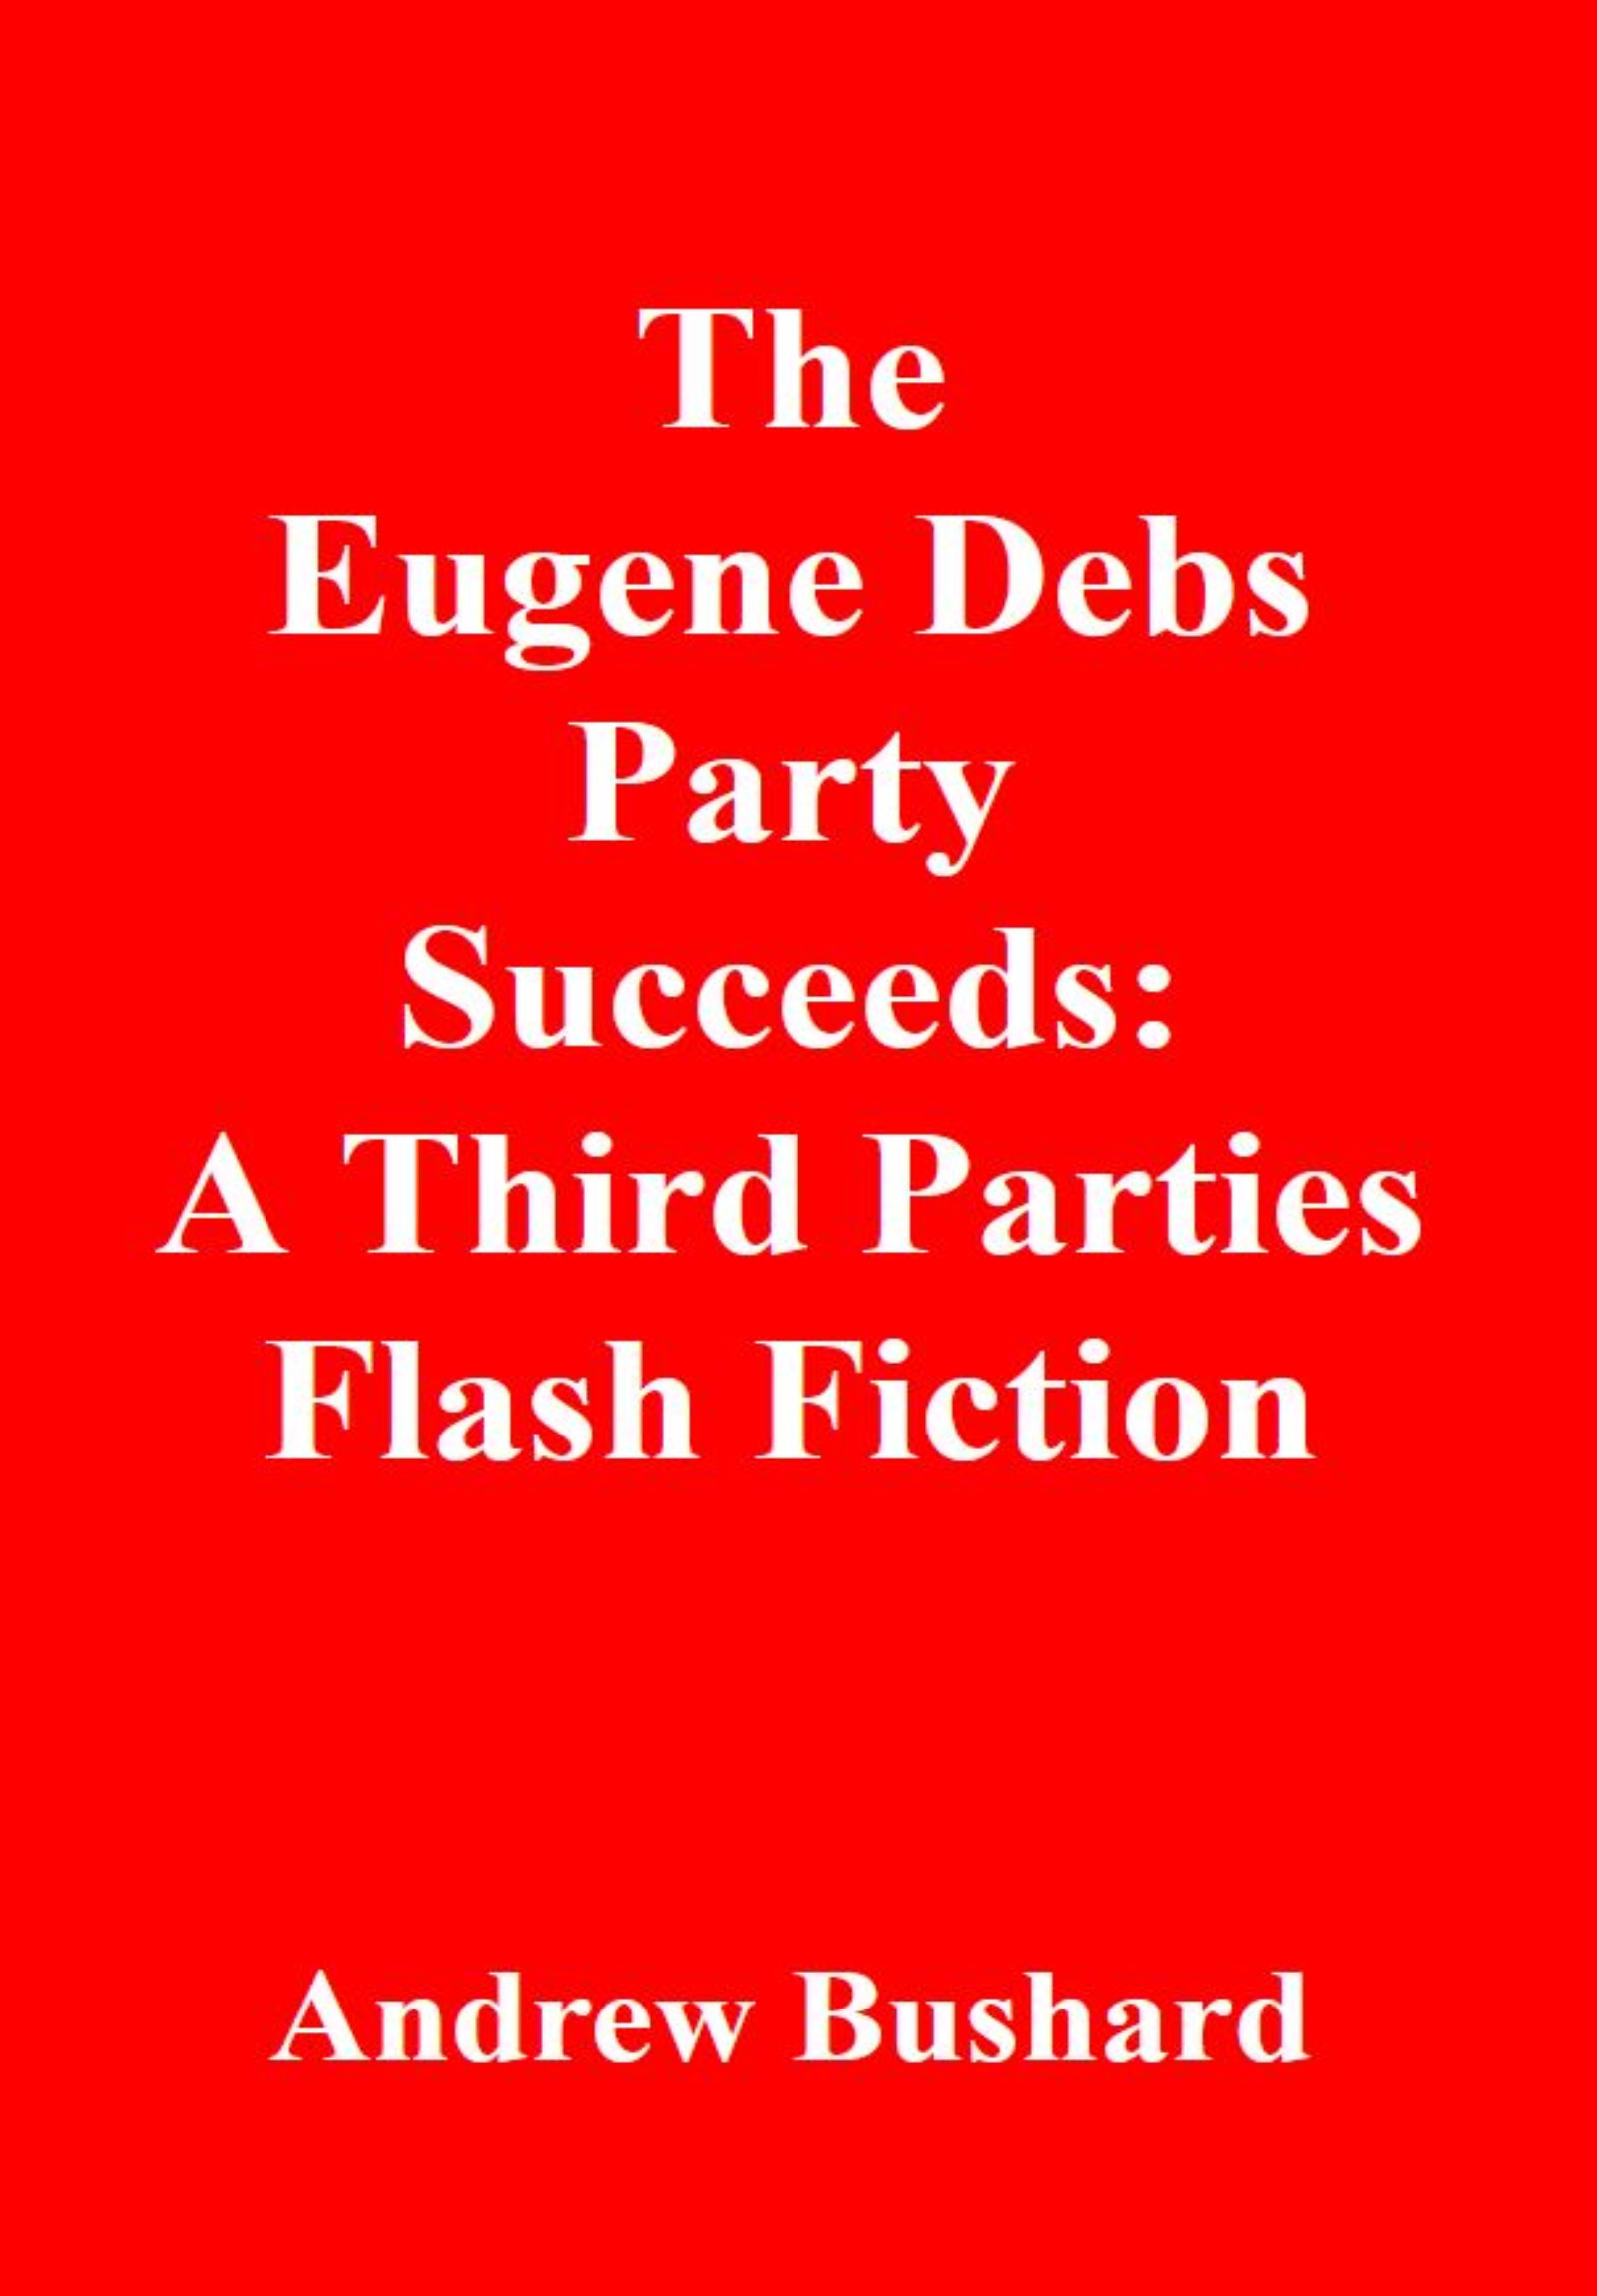 The Eugene Debs Party Succeeds: A Third Parties Flash Fiction